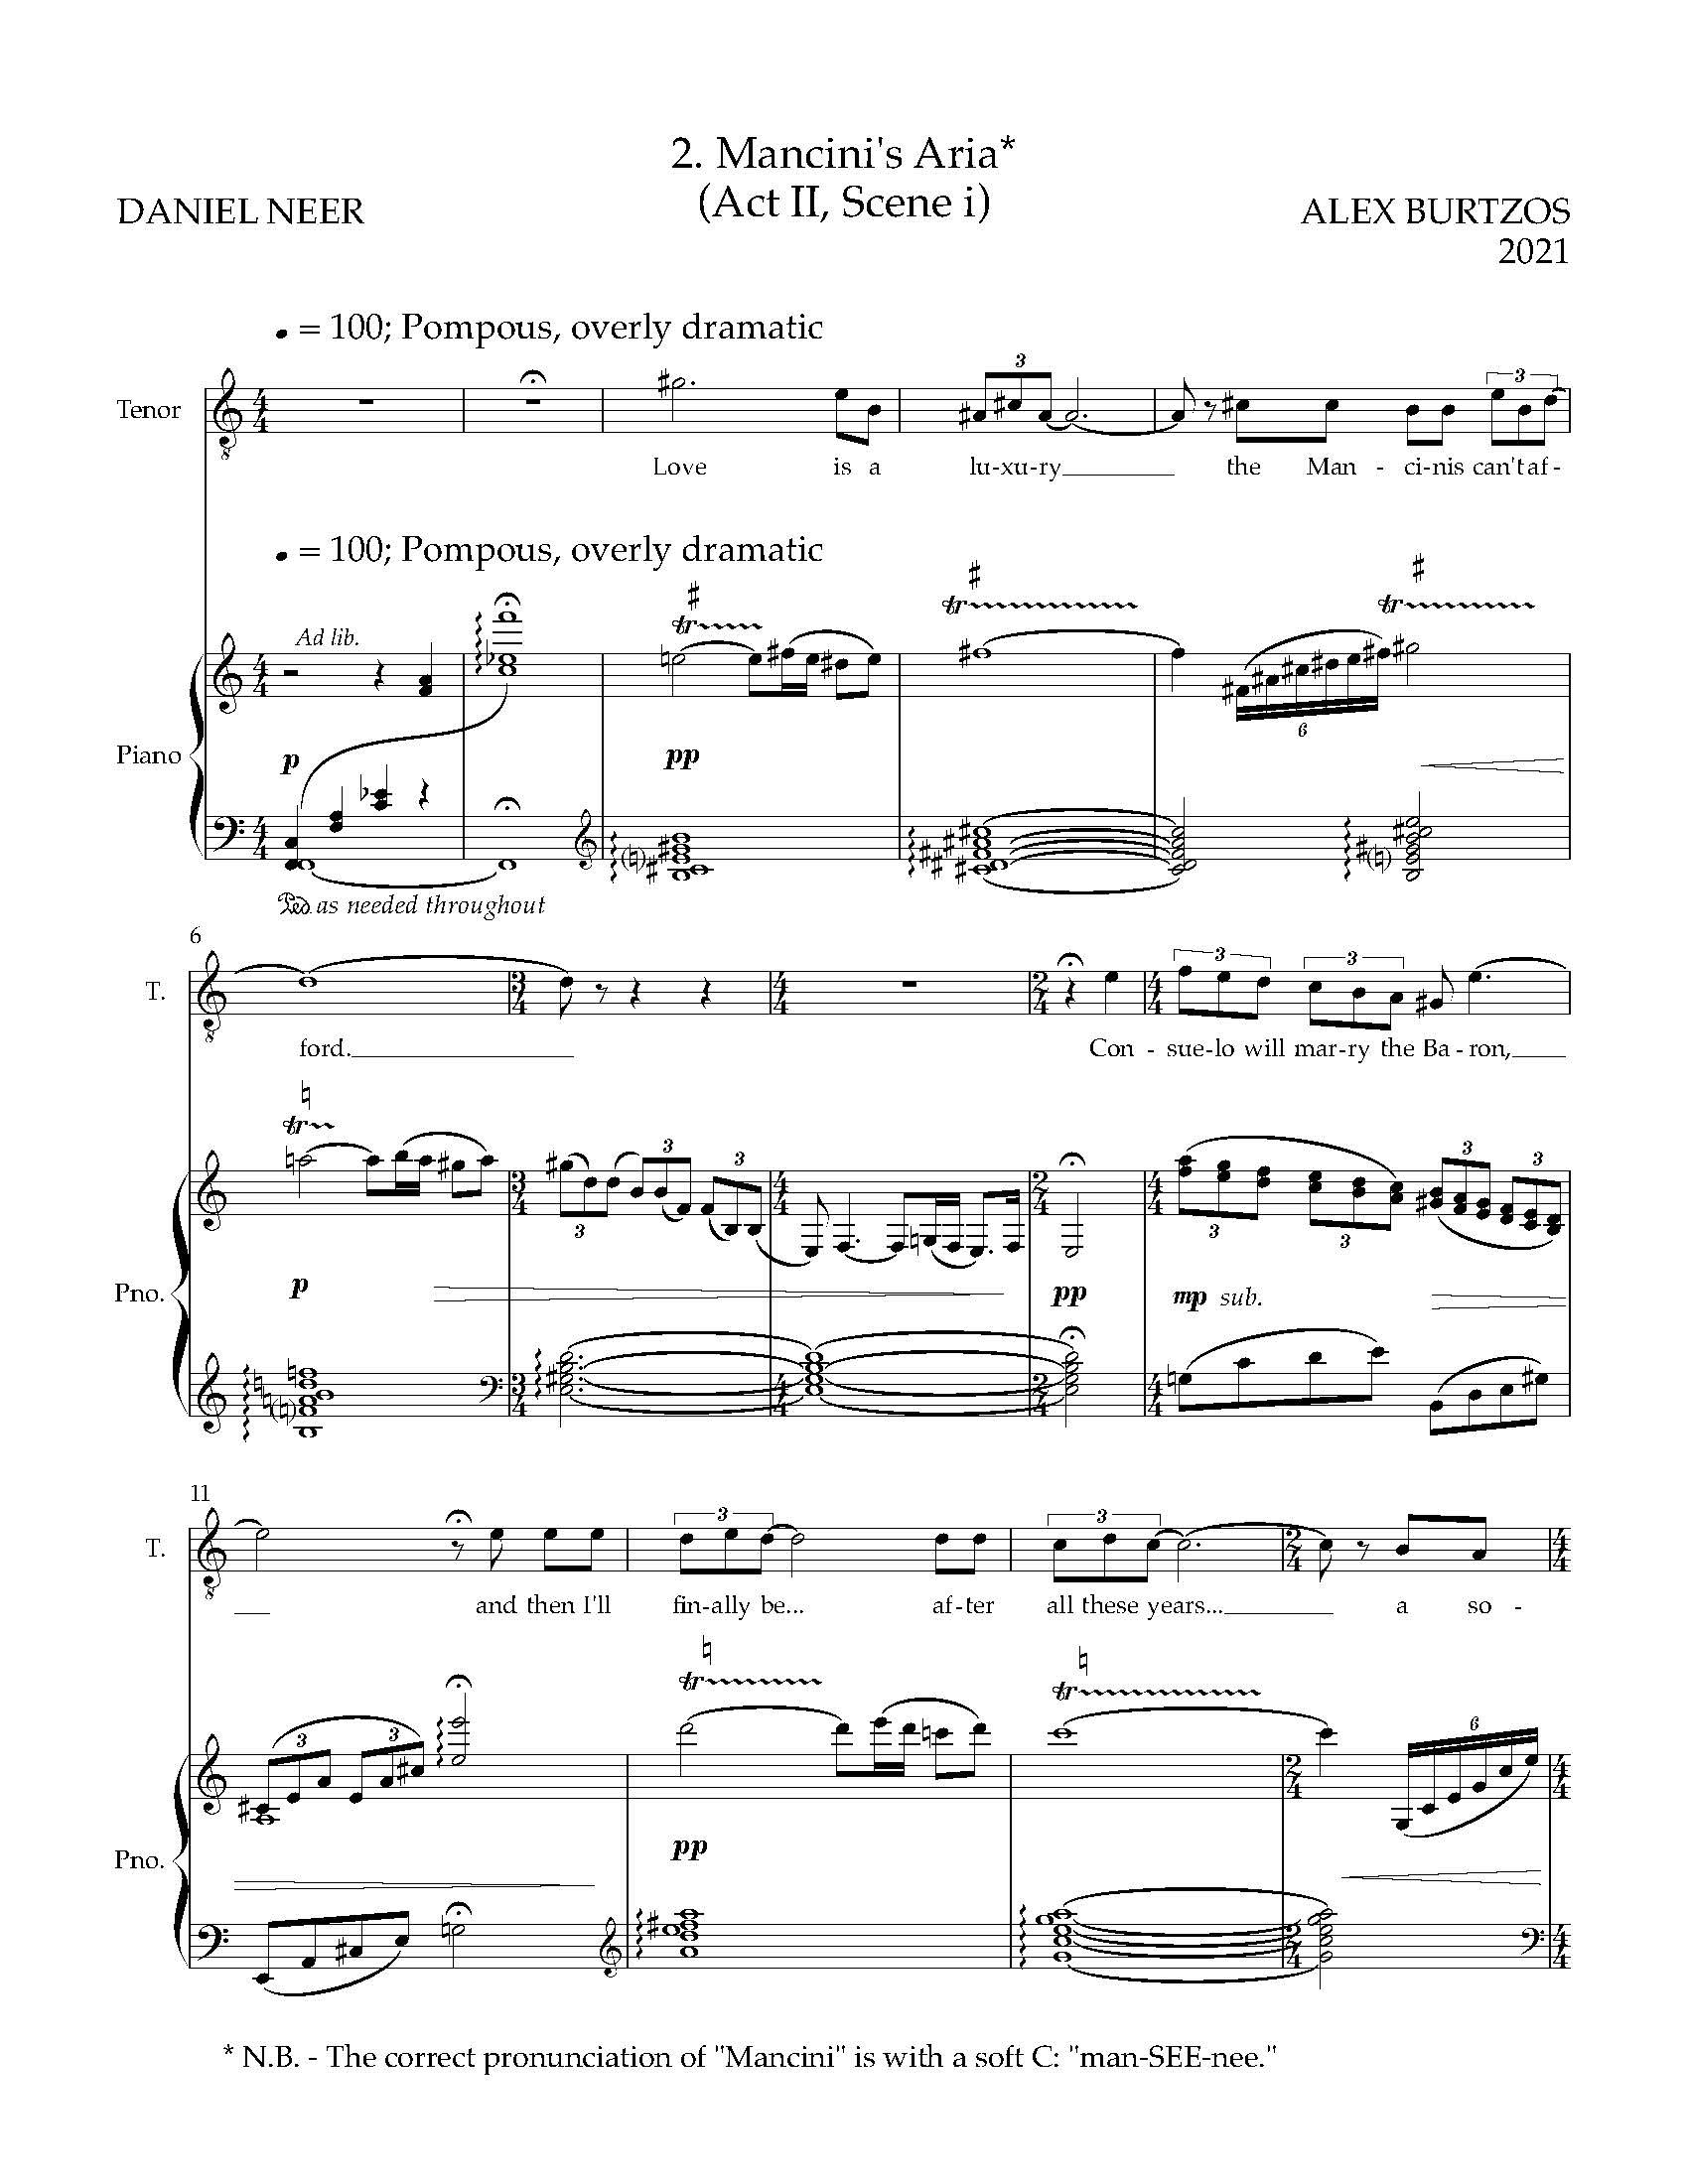 Five Arias from HWGS - Complete Score (1)_Page_10.jpg